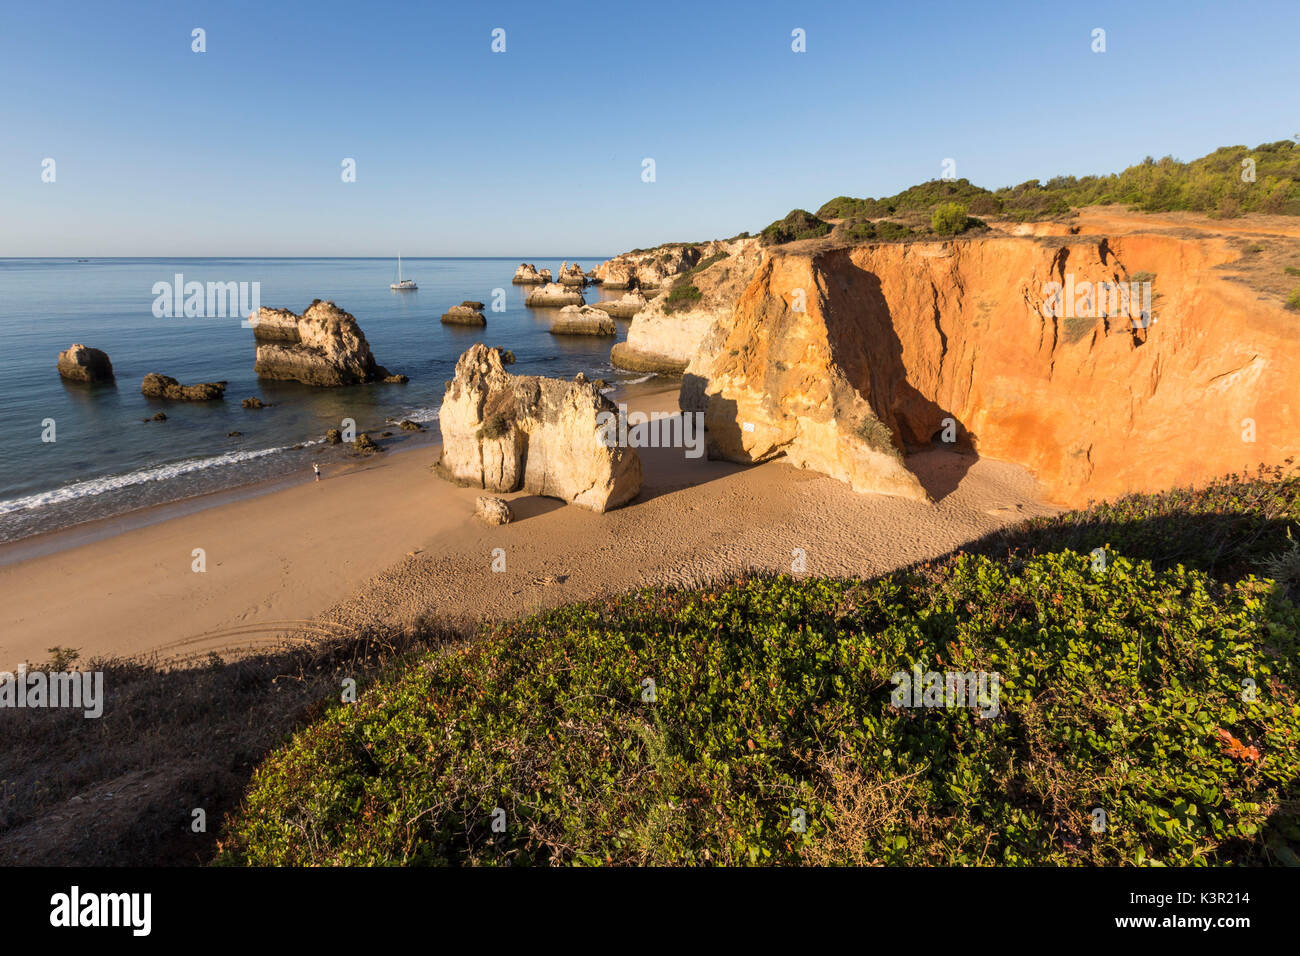 Top view of the sandy beach bathed by the blue ocean at dawn Praia do Alemao Portimao Faro district Algarve Portugal Europe Stock Photo